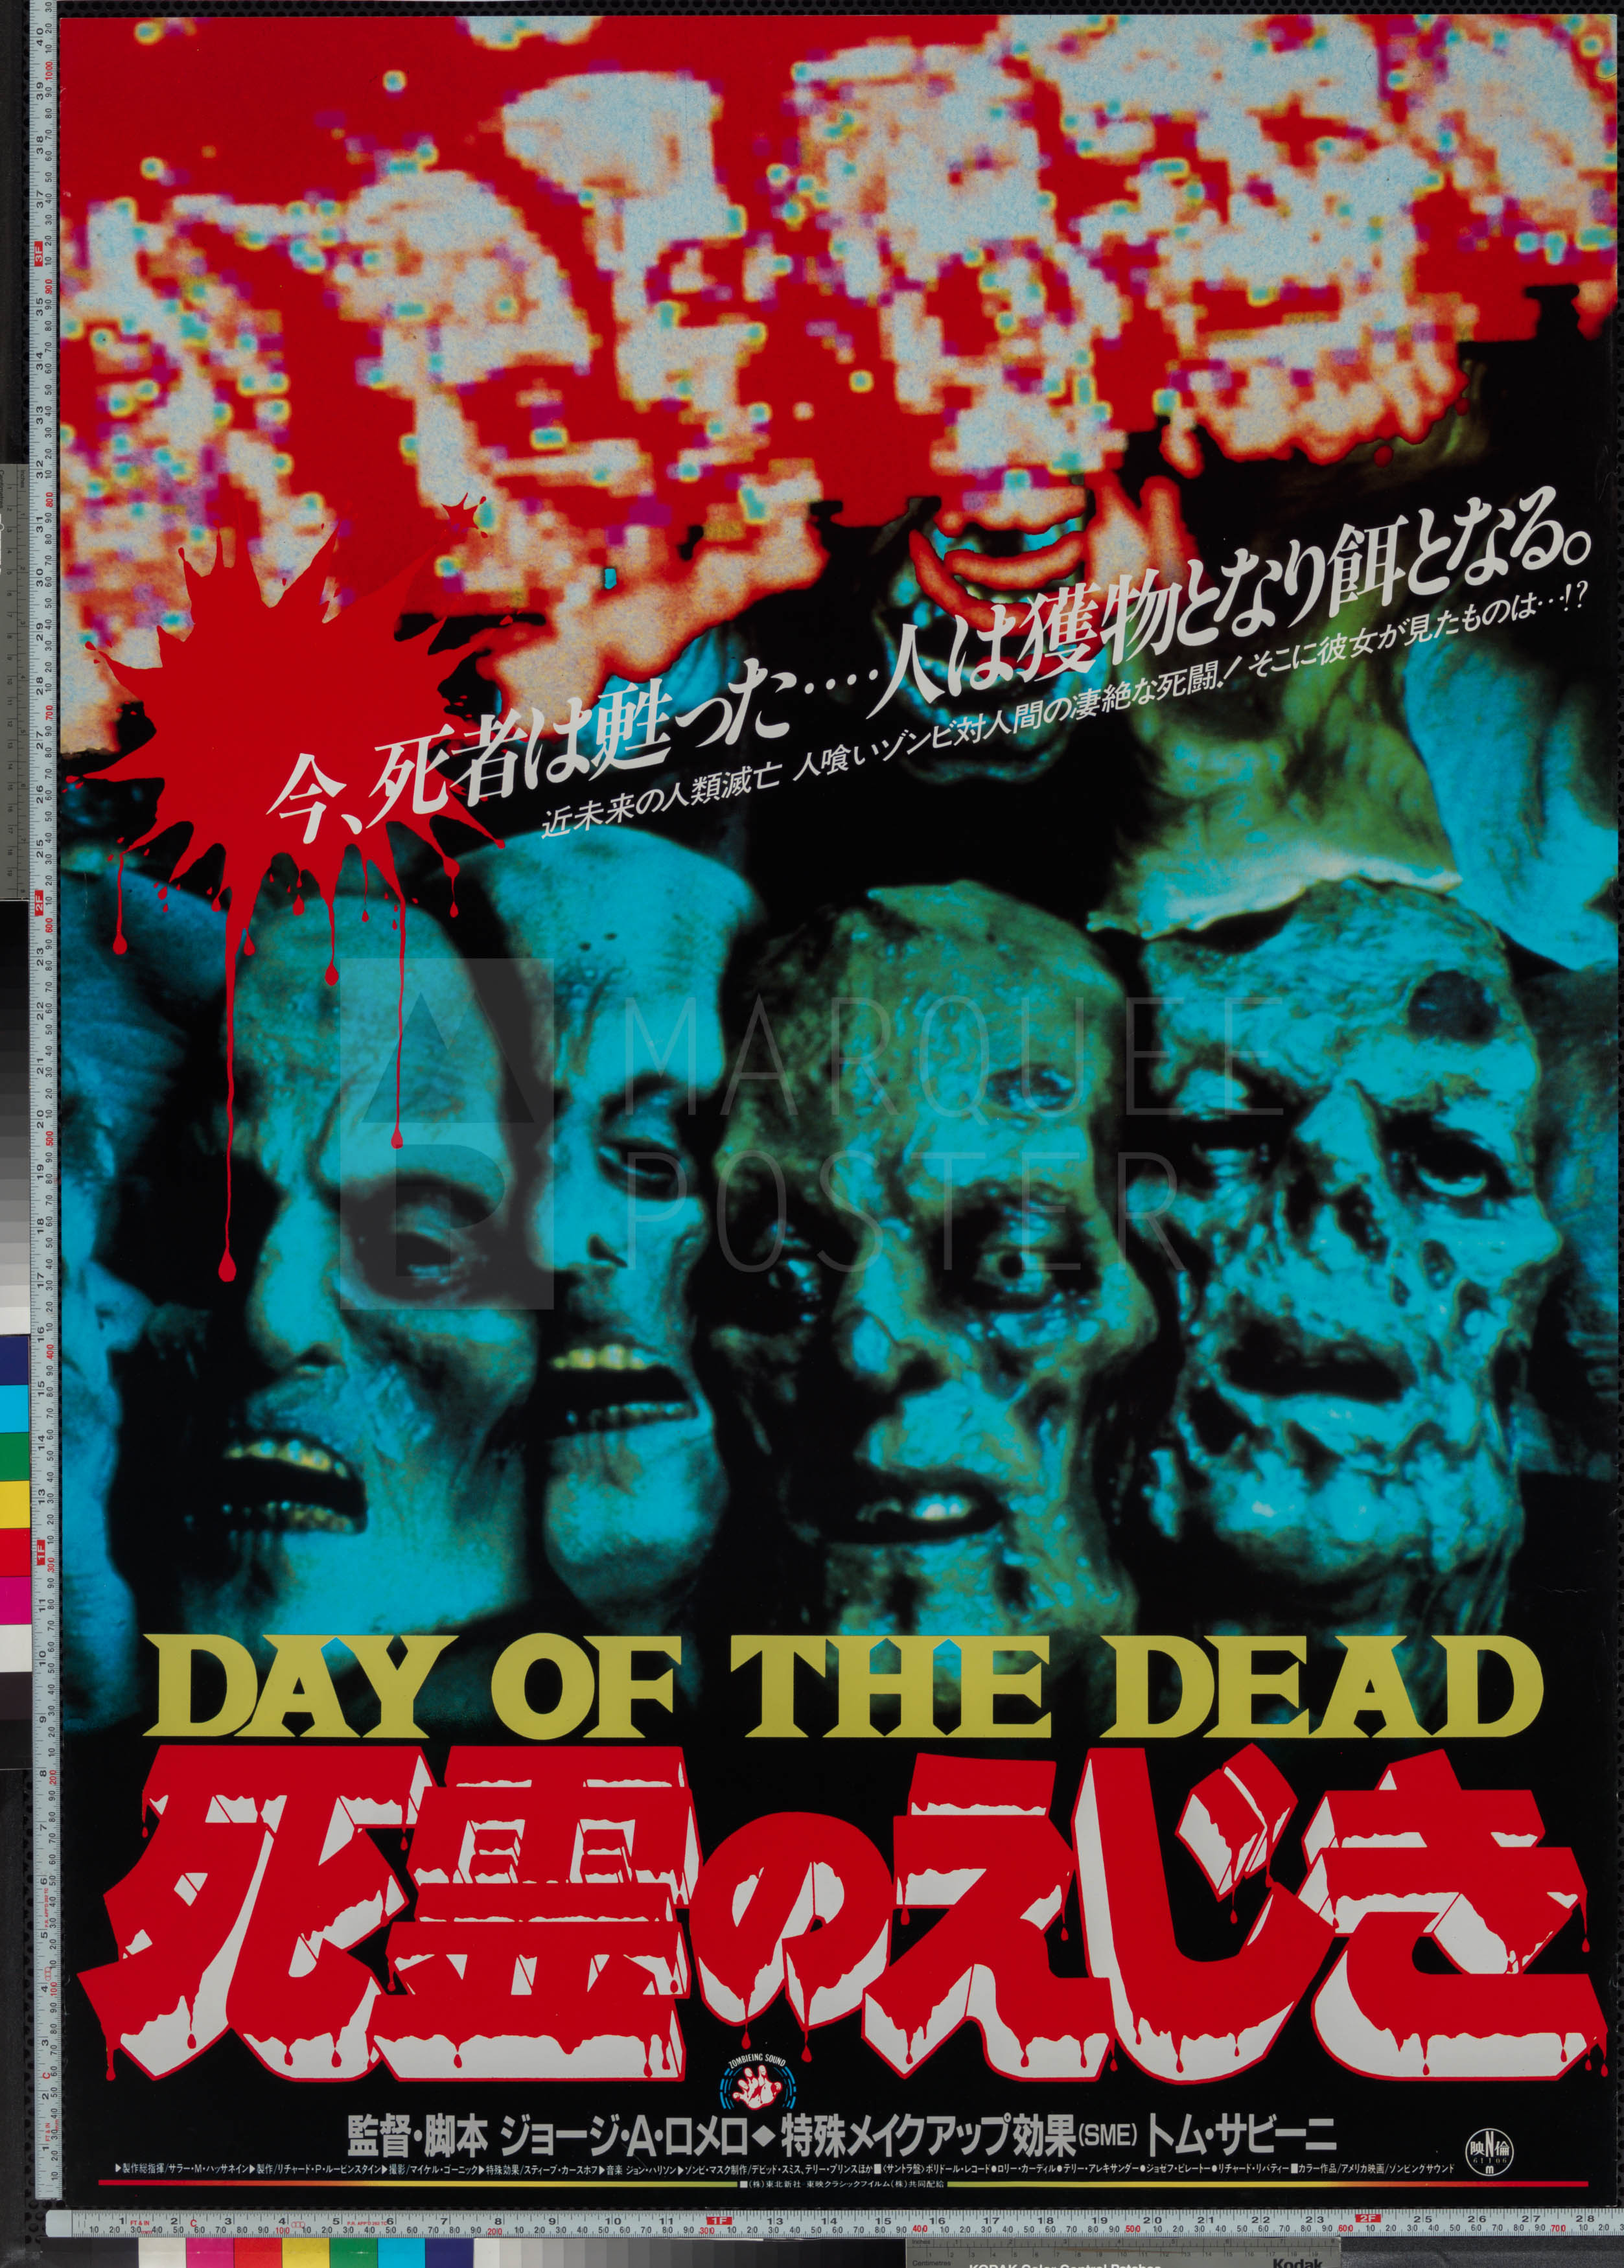 17-day-of-the-dead-zombie-faces-style-japanese-b1-1985-02